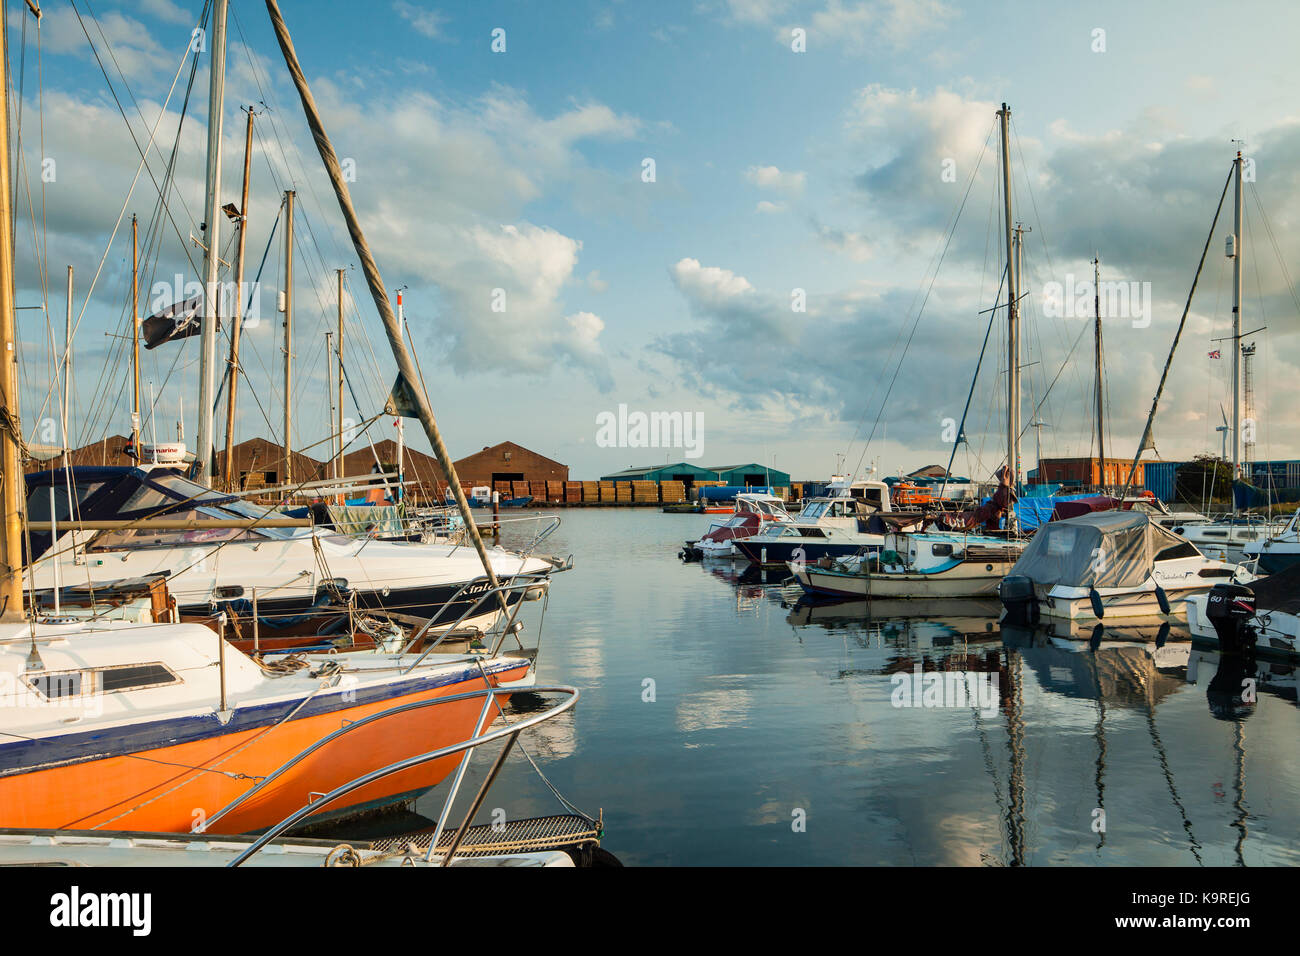 Summer evening at Shoreham Port in Southwick, West Sussex, England. Stock Photo